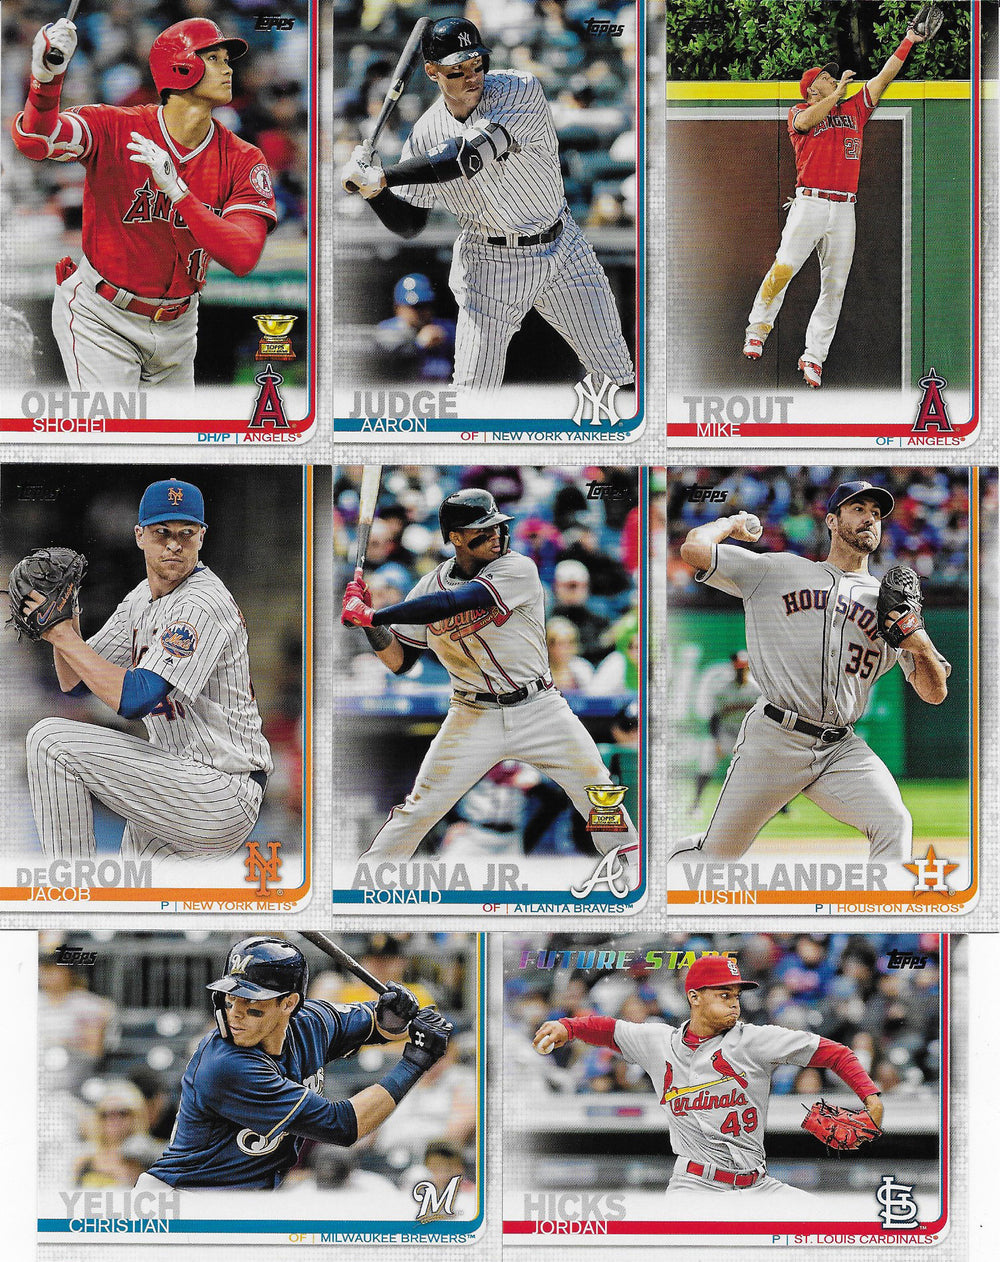 2019 Topps Baseball Complete Mint Hand Collated 700 Card Series 1 and 2 Set Featuring Fernando Tatis Jr. and Pete Alonso Rookies